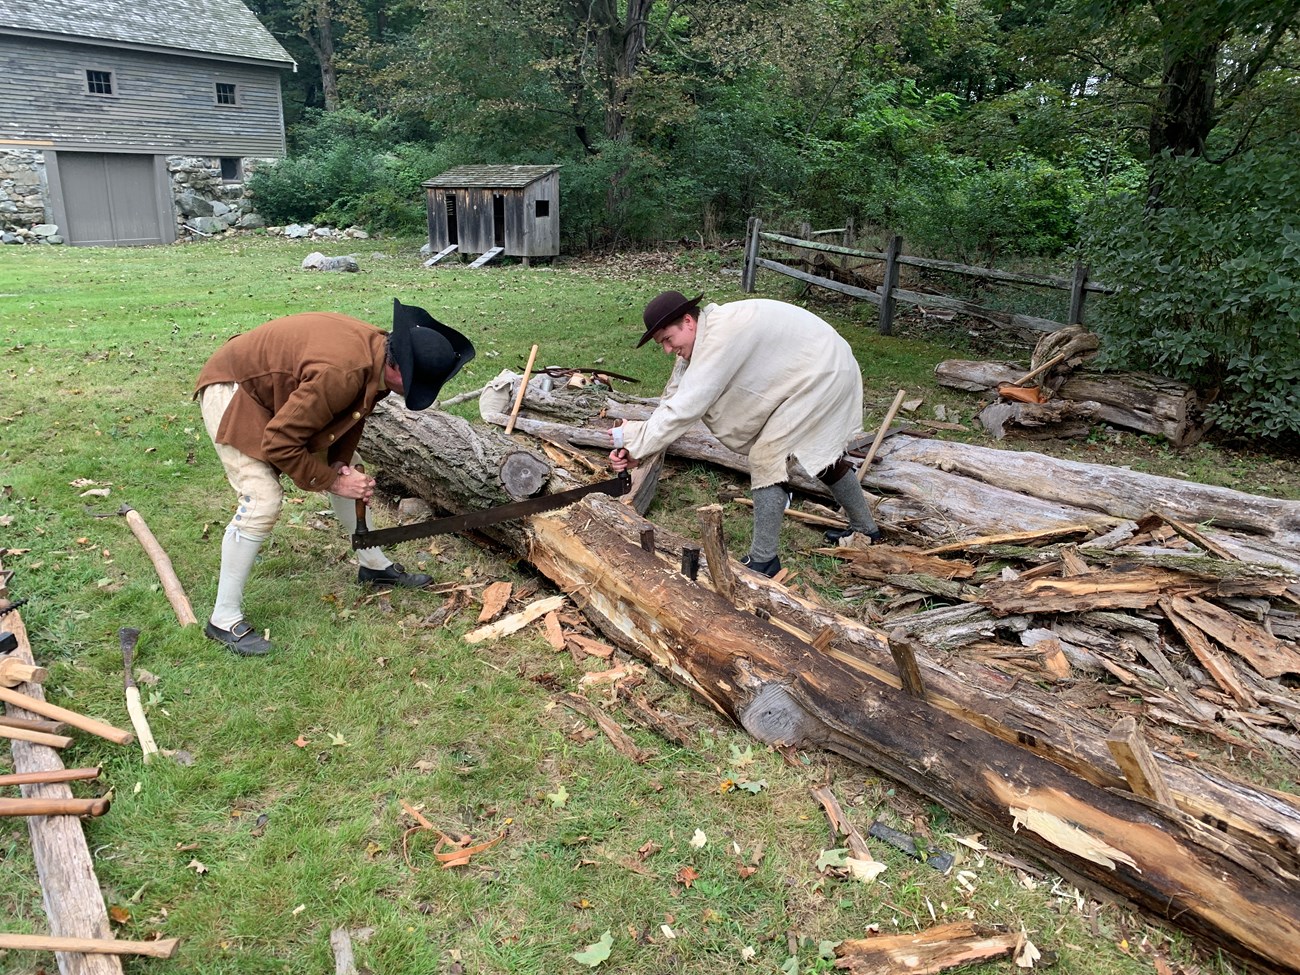 Two men in 1770's work clothes use a two man saw to cut a tree in half.